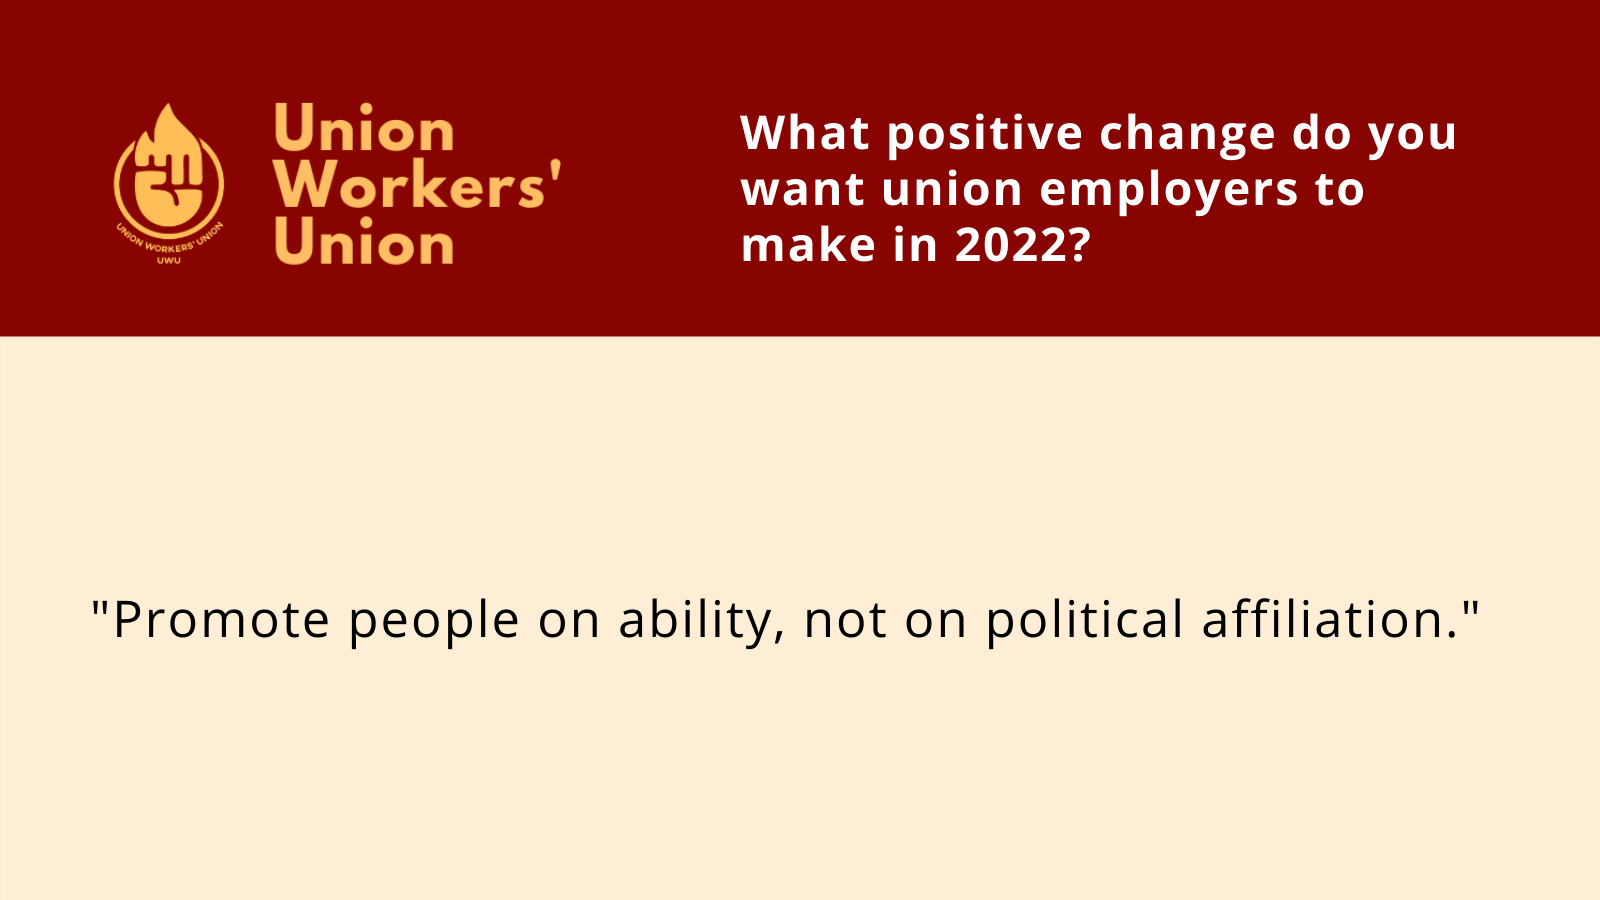 UWU logo next to the question - what positive change do you want union employers to make in 2022? Member response: Promote people on ability, not political affiliation.